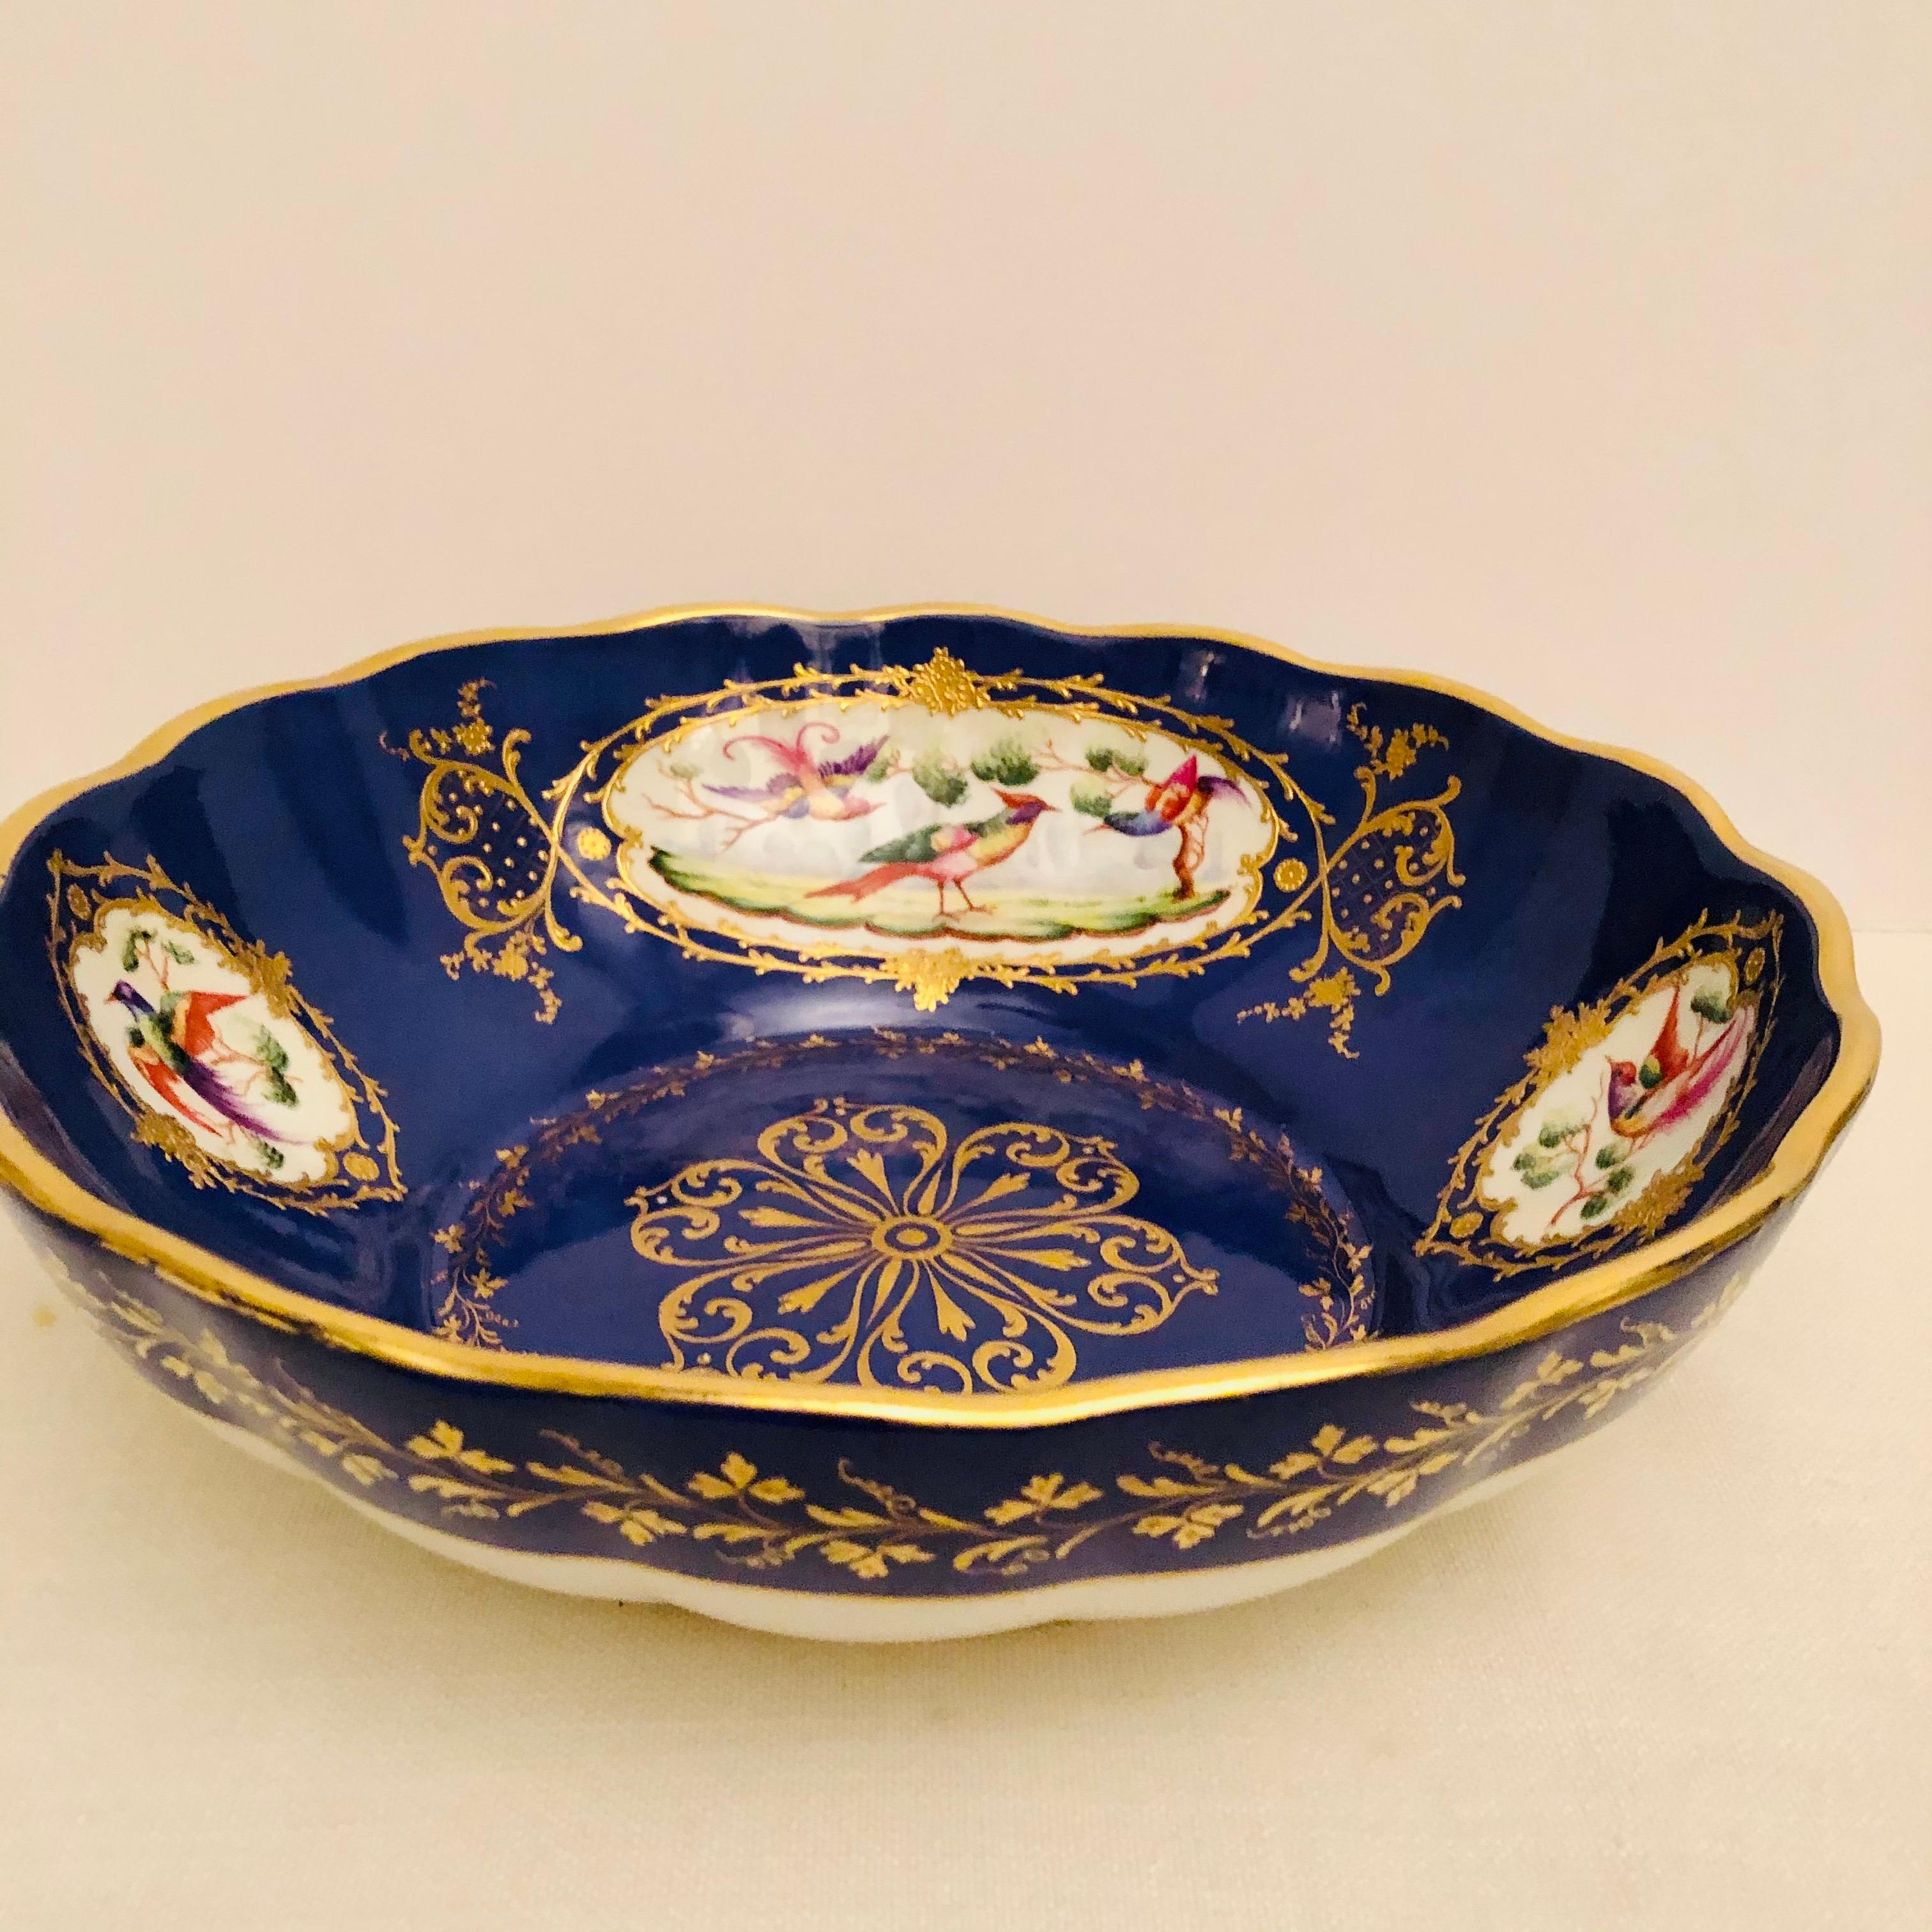 Hand-Painted Le Tallec Bowl Painted with 4 Medallions of Exotic Birds on Royal Blue Ground